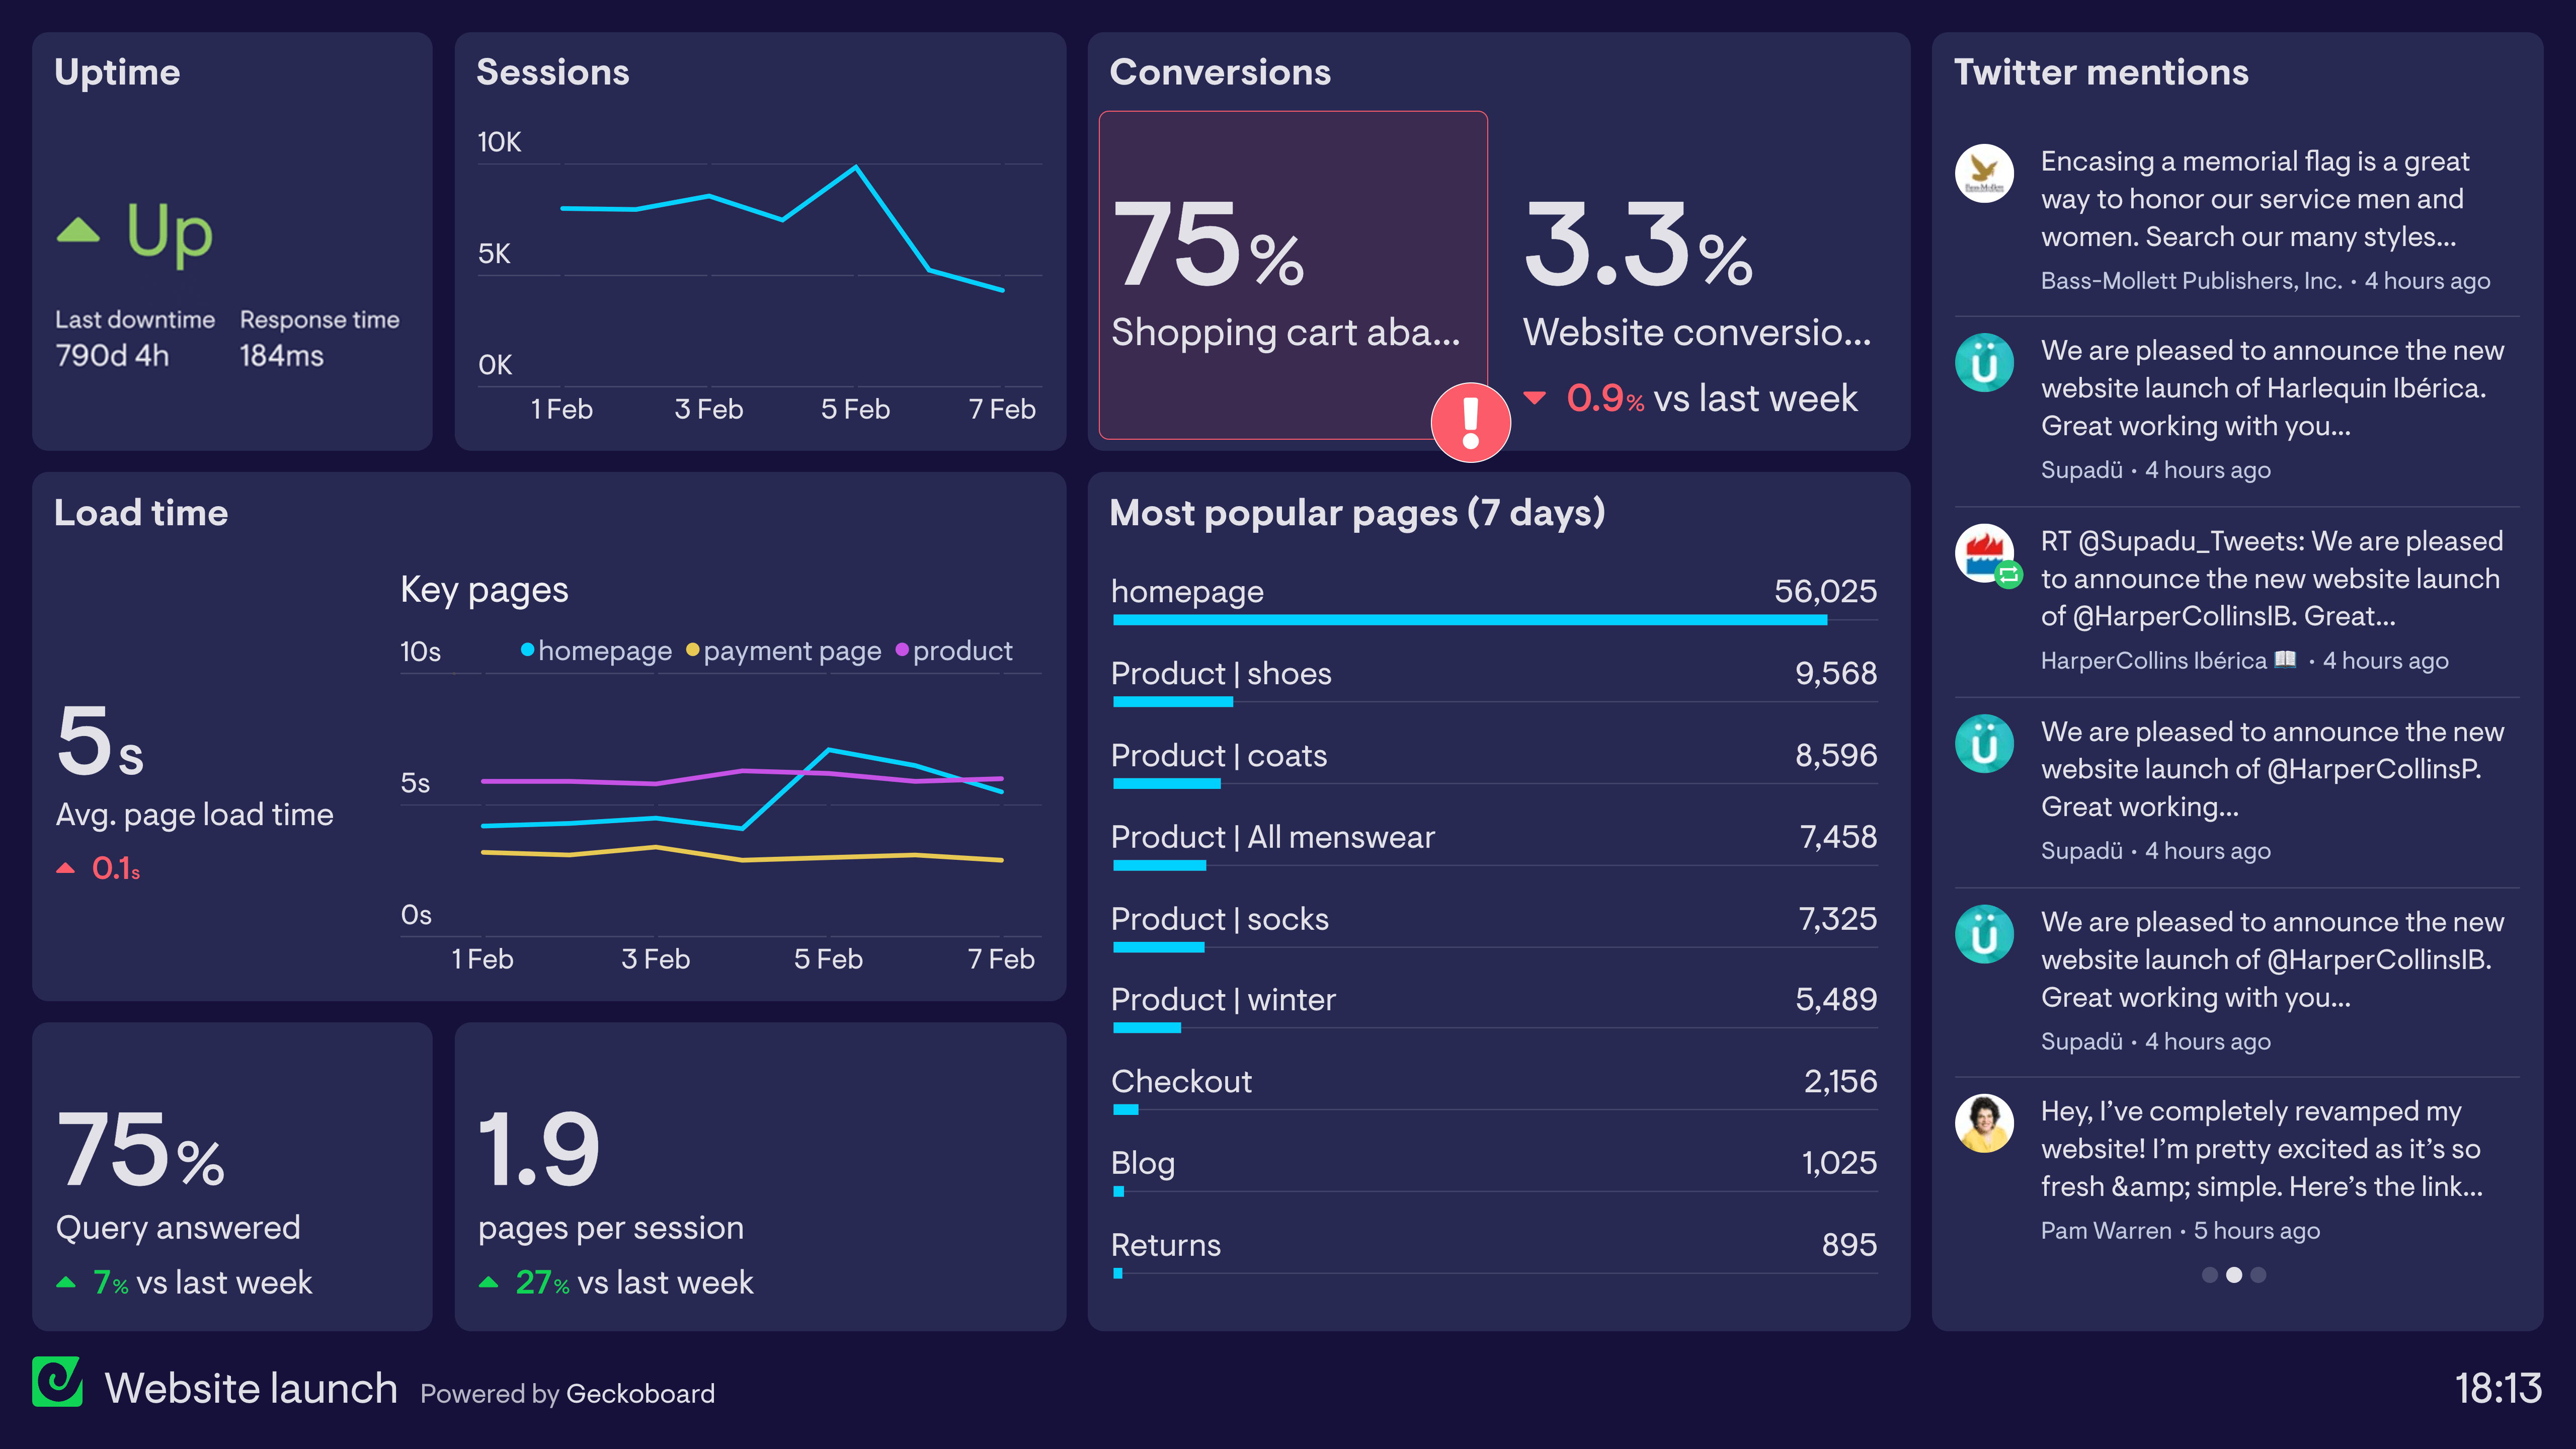 Example of a dashboard used by a marketing team for the launch of their new website